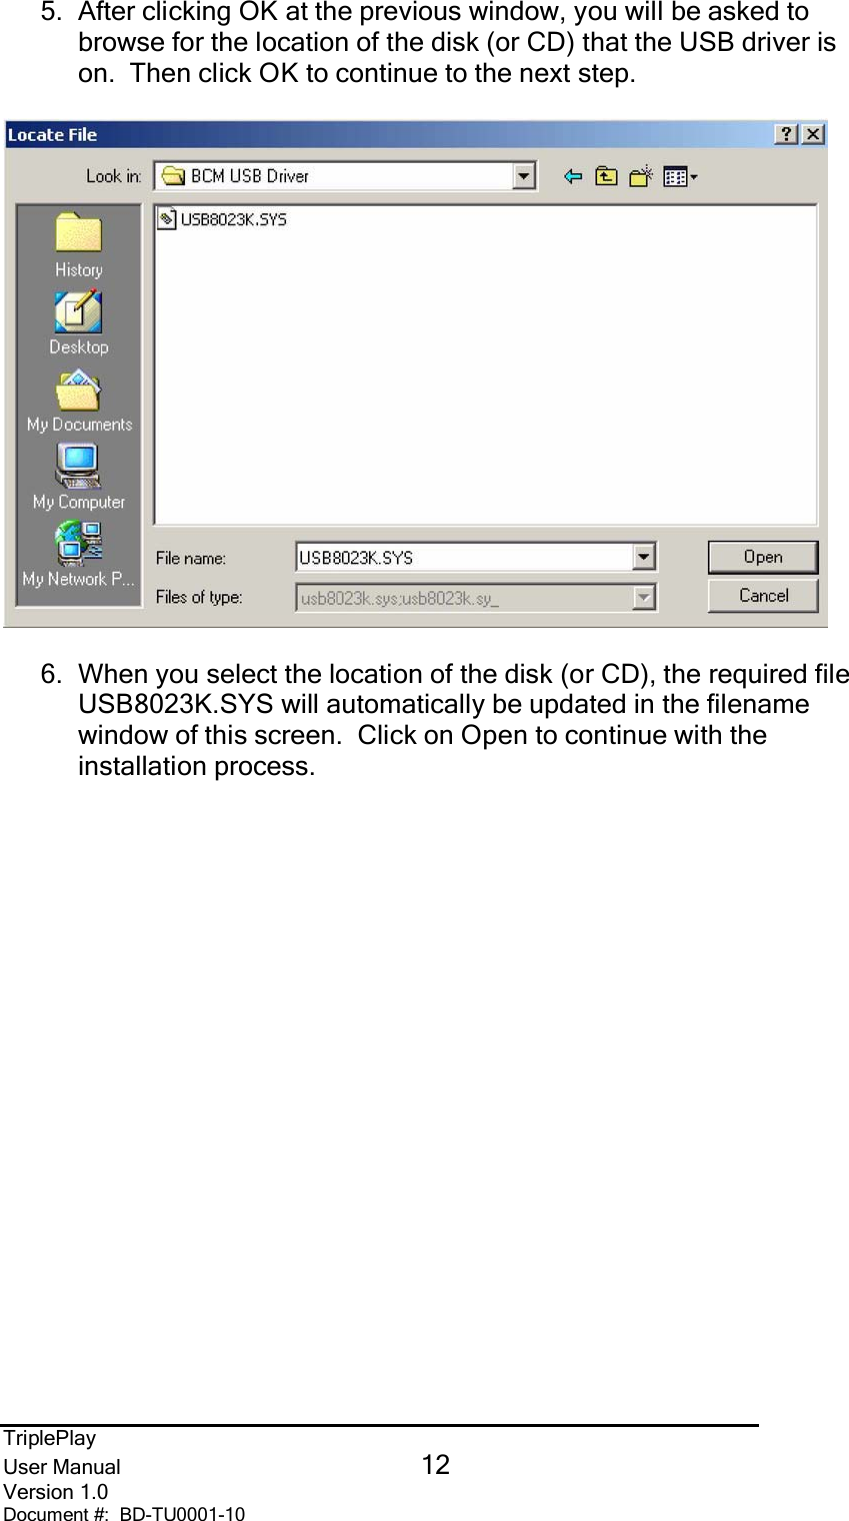 TriplePlayUser Manual 12Version 1.0Document #:  BD-TU0001-105.  After clicking OK at the previous window, you will be asked tobrowse for the location of the disk (or CD) that the USB driver ison.  Then click OK to continue to the next step.6.  When you select the location of the disk (or CD), the required fileUSB8023K.SYS will automatically be updated in the filenamewindow of this screen.  Click on Open to continue with theinstallation process.